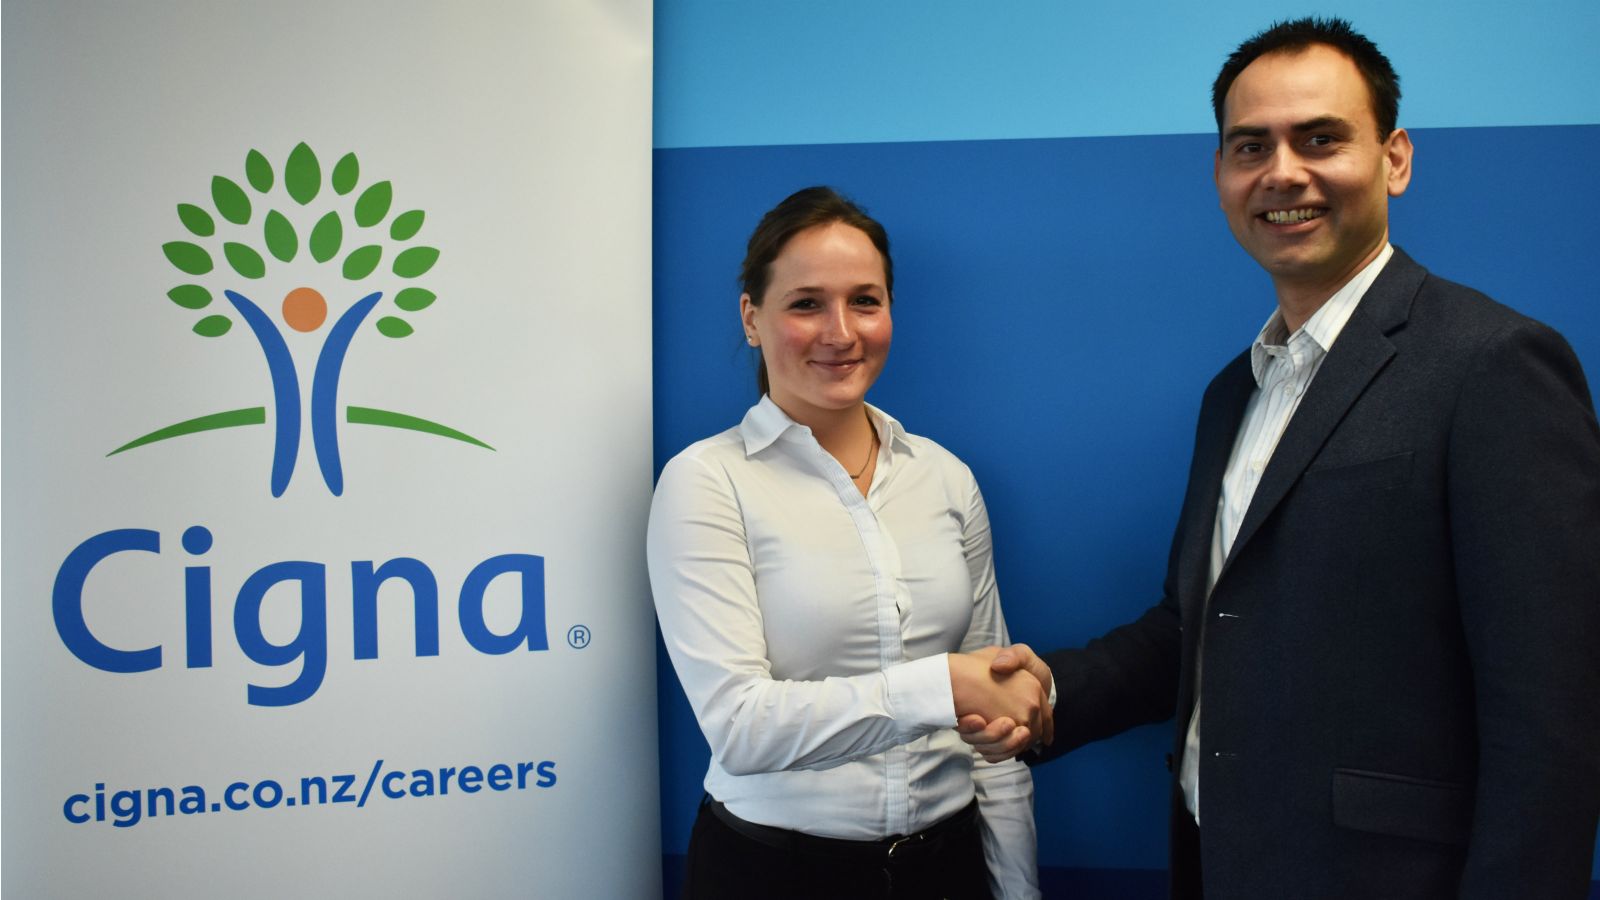 Cigna 2018 actuarial scholarship recipient, Clarissa Nowak, with Nathan Thomas, Head of Customer Propositions and Value at Cigna.